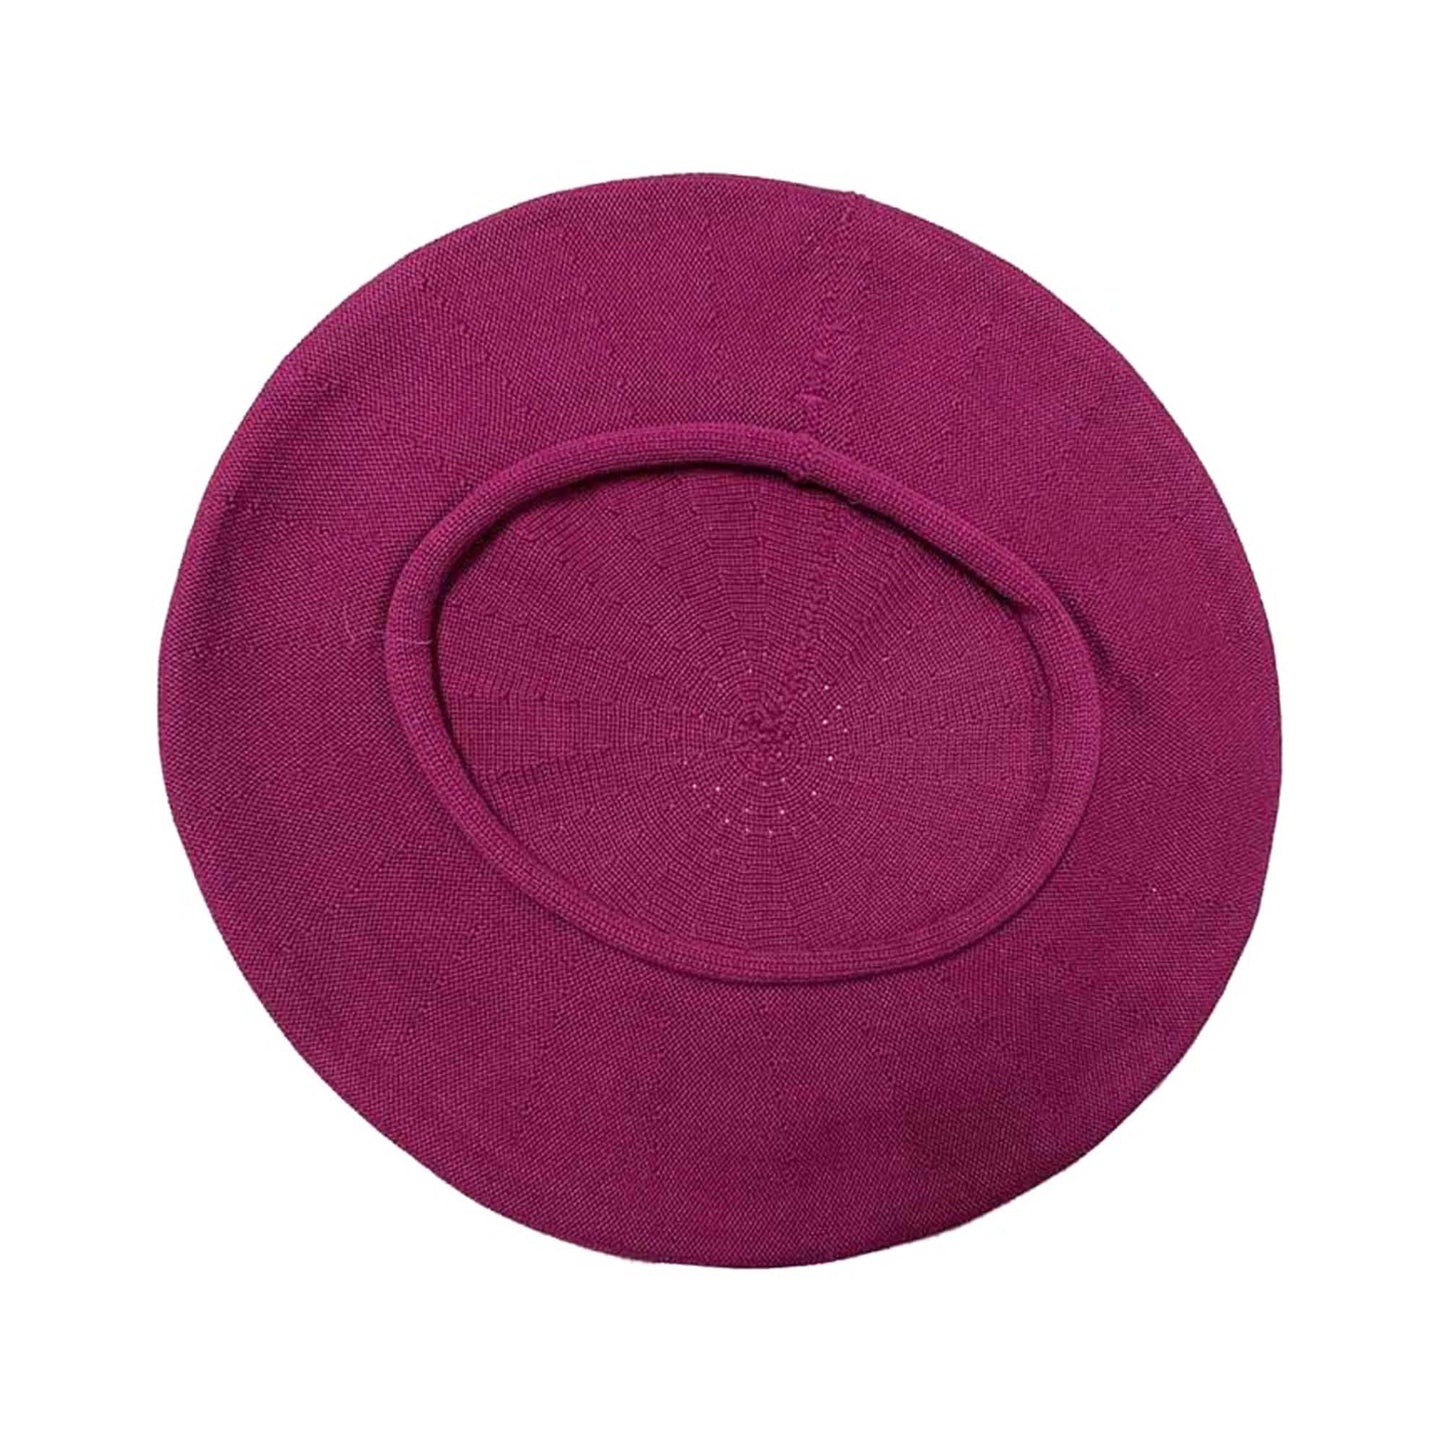 Raspberry Cotton Classic French Beret, NEW! "The kind you find in a Secondhand Store", PARKHURST BERETS, Made In Canada, #30017